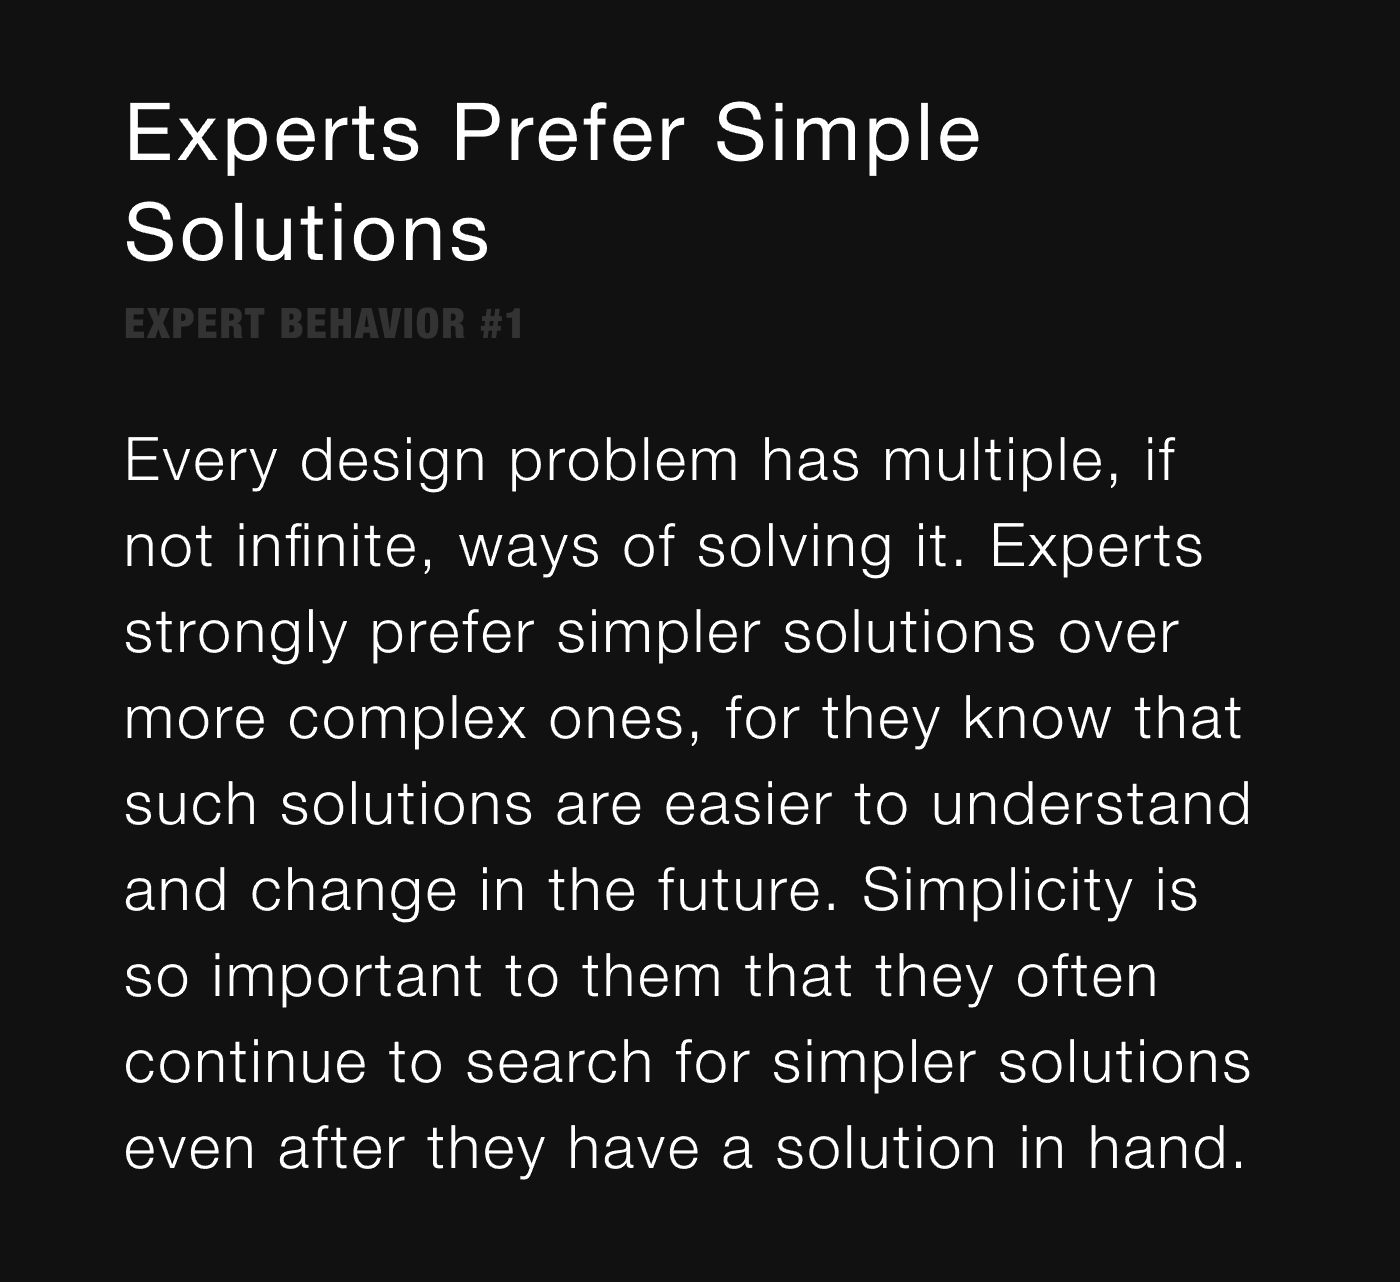 Experts Prefer Simple Solutions - Every design problem has multiple, if not infinite, ways of solving it. Experts strongly prefer simpler solutions over more complex ones, for they know that such solutions are easier to understand and change in the future. Simplicity is so important to them that they often continue to search for simpler solutions even after they have a solution in hand.